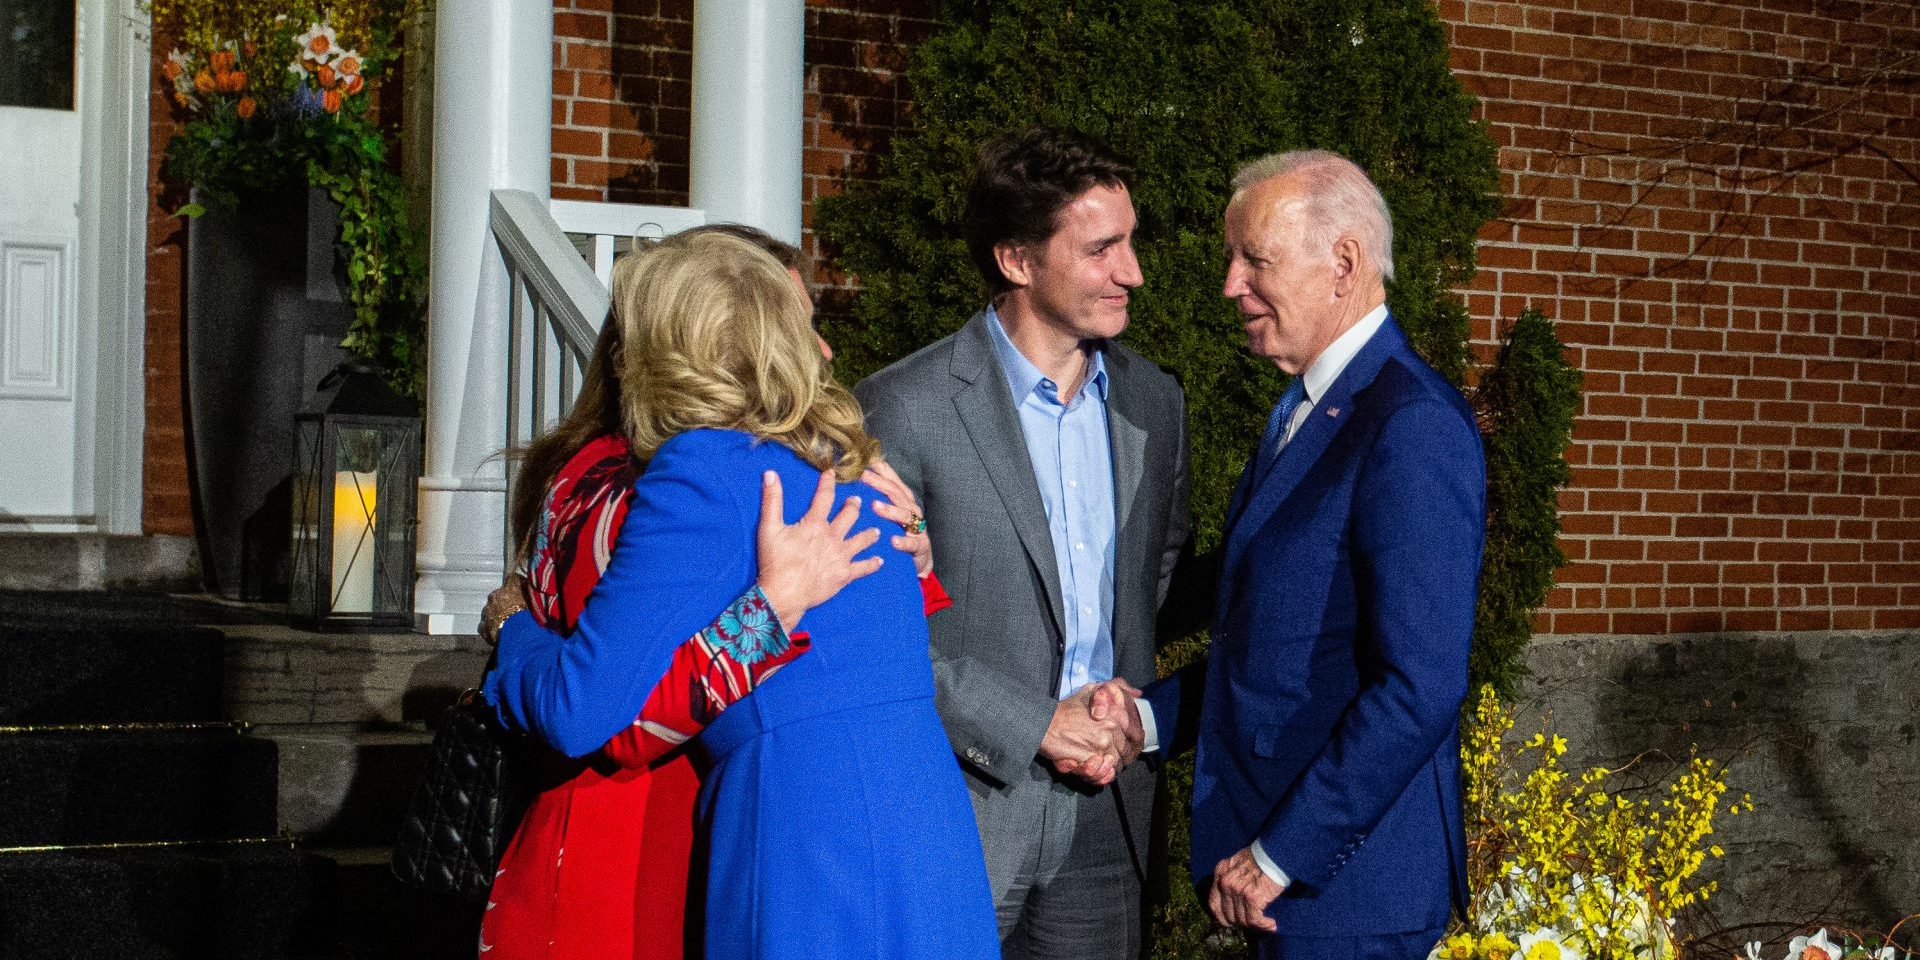 Prime Minister Justin Trudeau and Sophie Gregoire Trudeau greet President of the United States of America Joe Biden and First Lady Jill Biden at Rideau Cottage in Ottawa on  March 23, 2023, for his first state visit to Canada. The Hill Times photograph by Andrew Meade